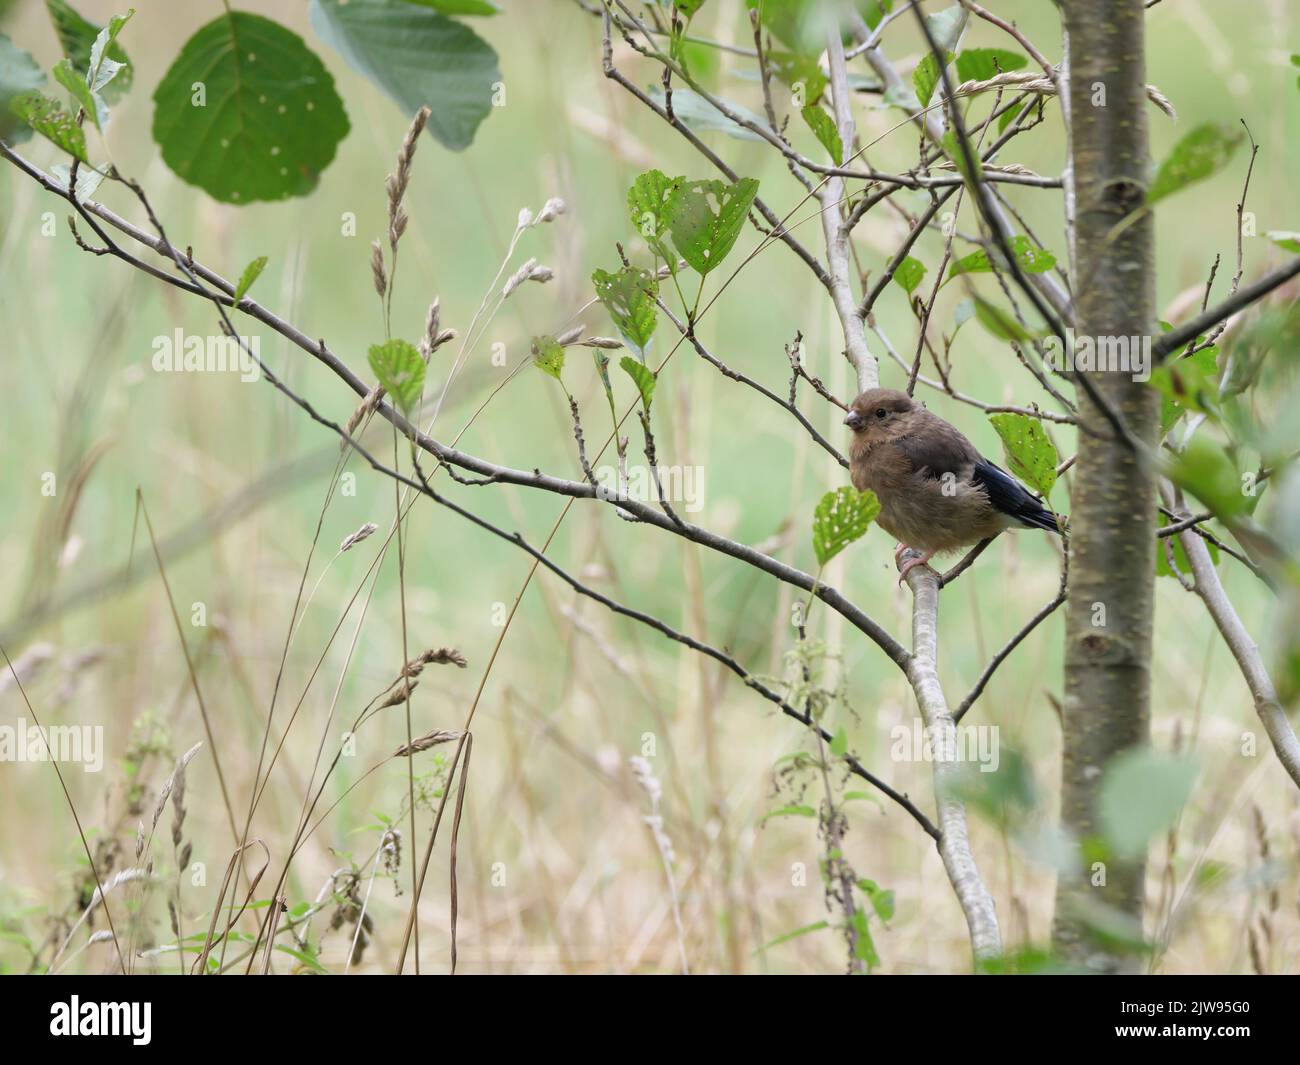 A young bullfinch sits in a bush and is fed by its mother Stock Photo